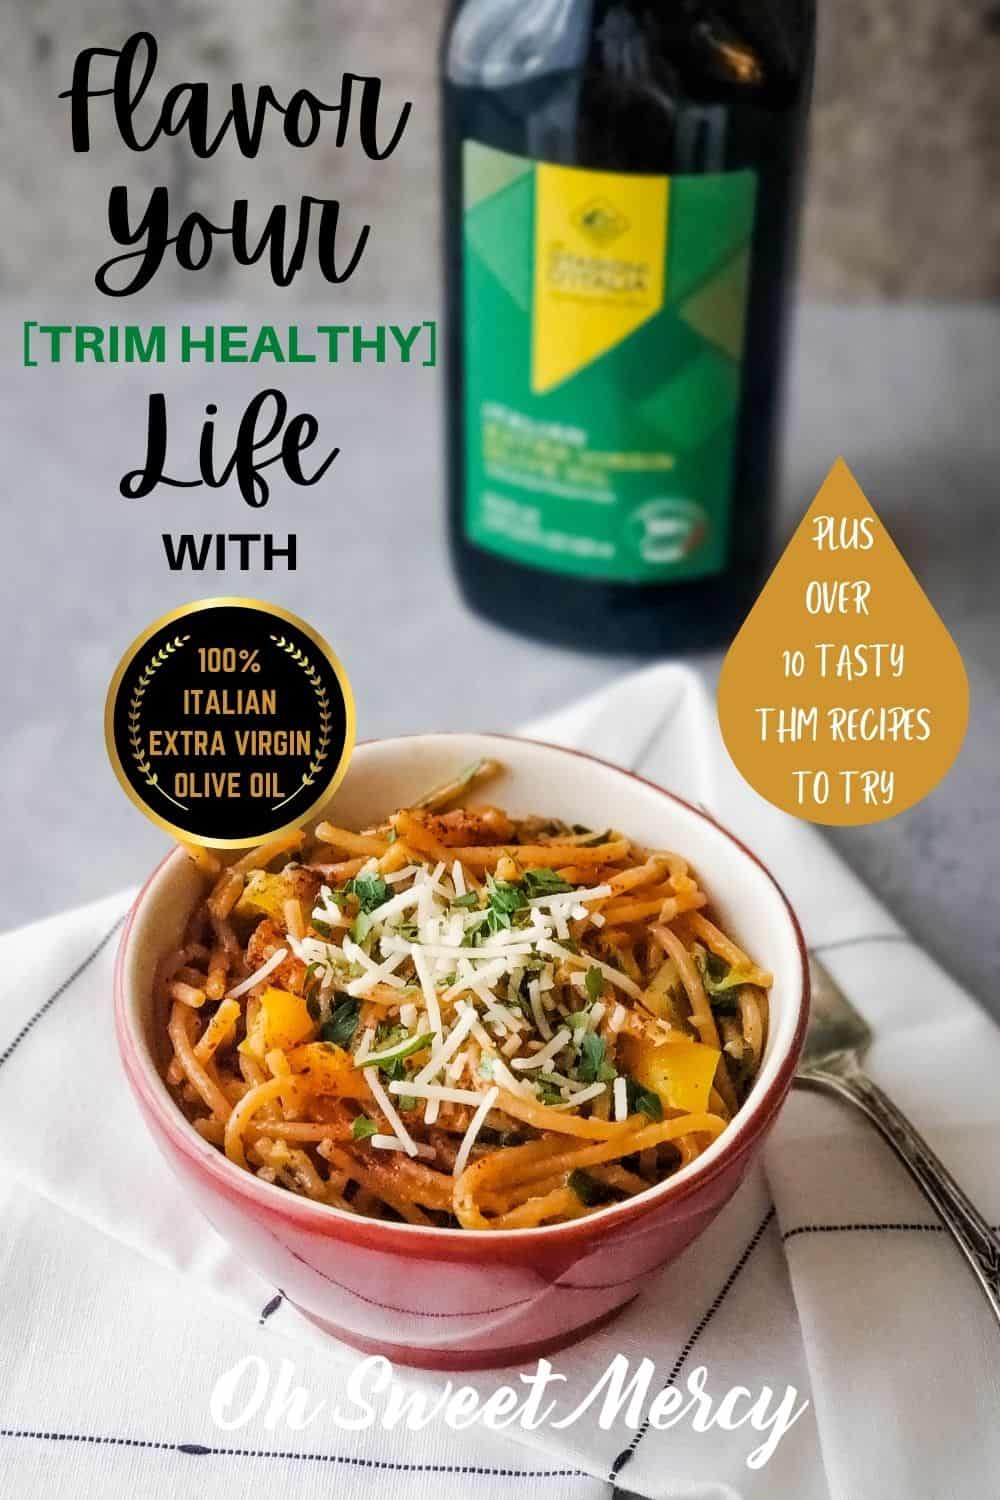 The Flavor Your Life Campaign wants to help educate you about European extra virgin olive oil. Learn more about it PLUS get over 10 tasty, THM friendly recipes to use your healthy olive oil in every day. Sponsored post #EVOO #oliveoil #momsmeet